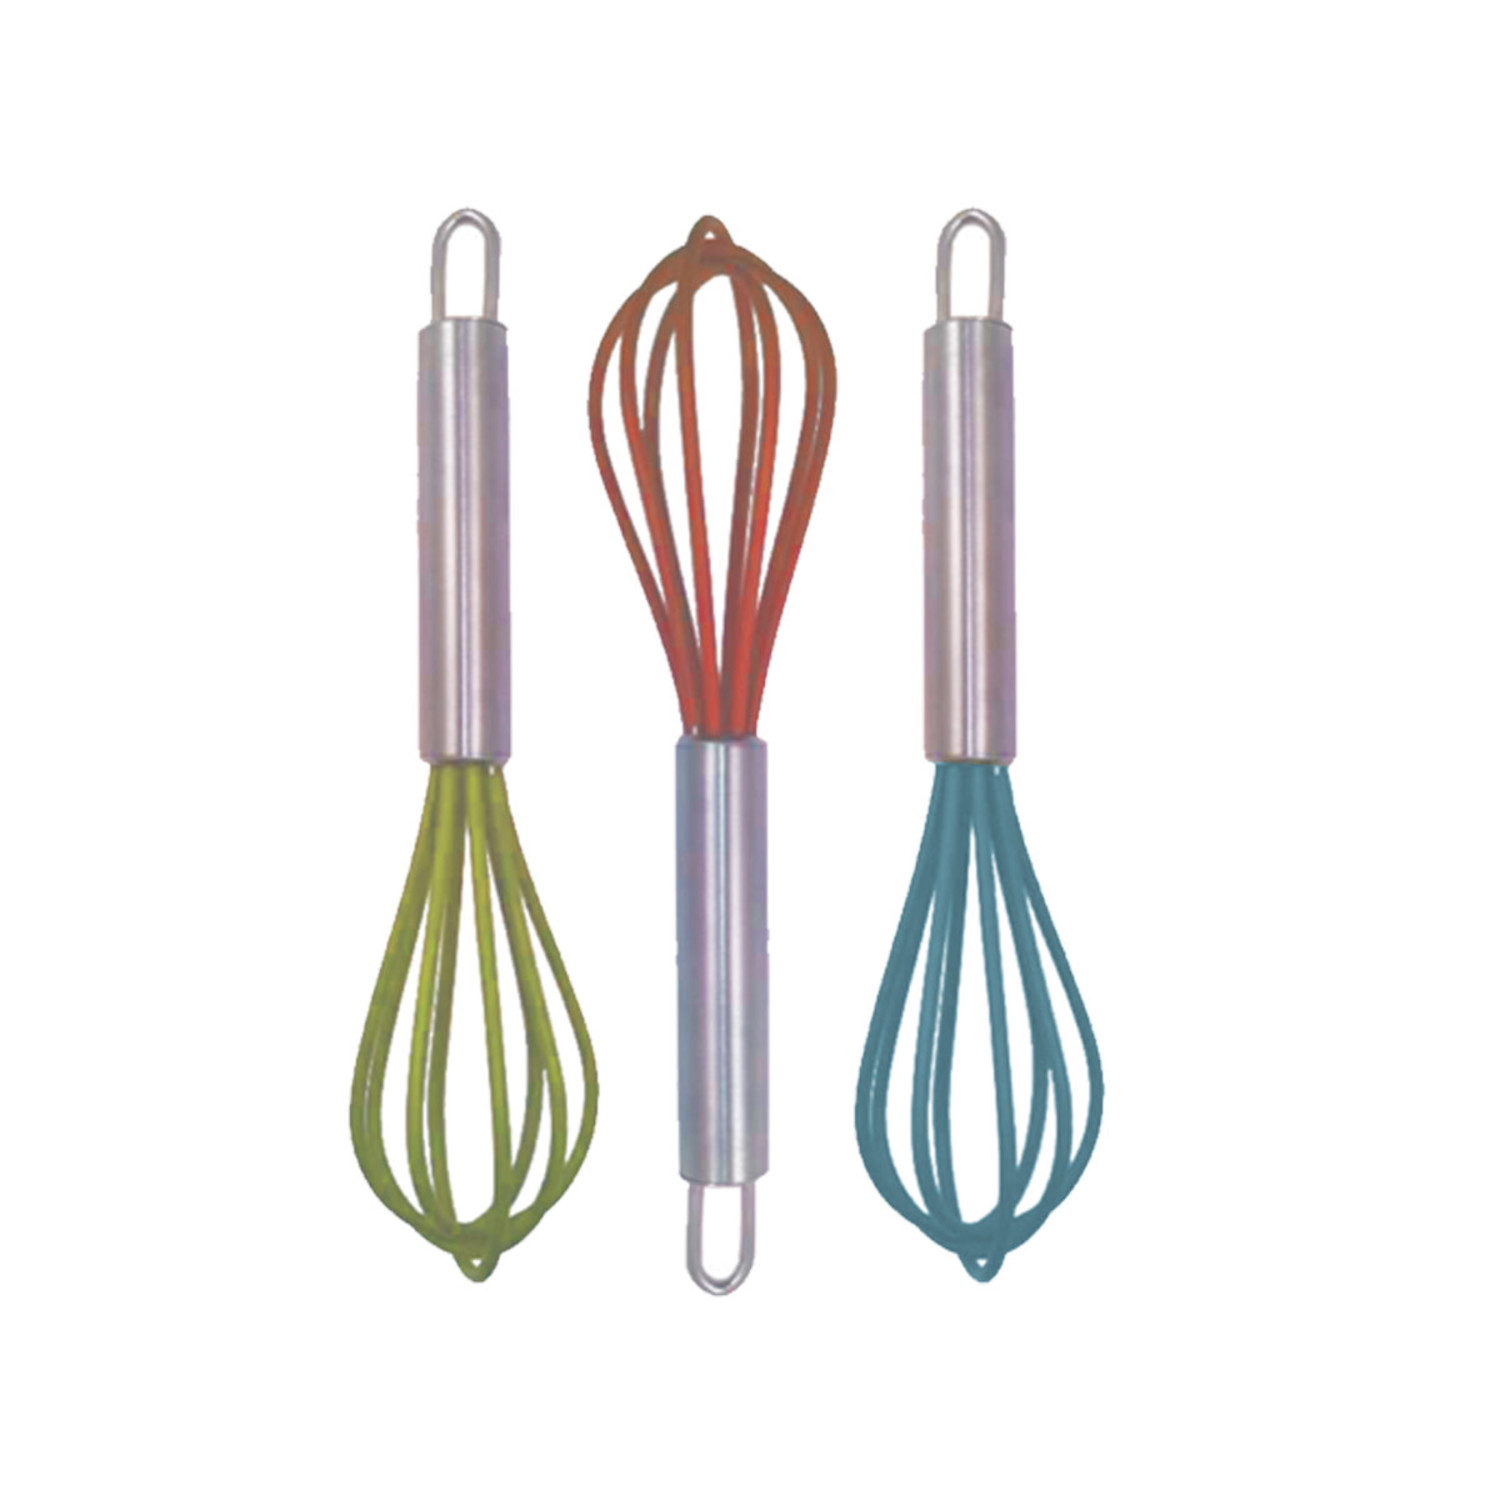 Range Kleen TG237A Small Silicone Whisk by Taste of Home